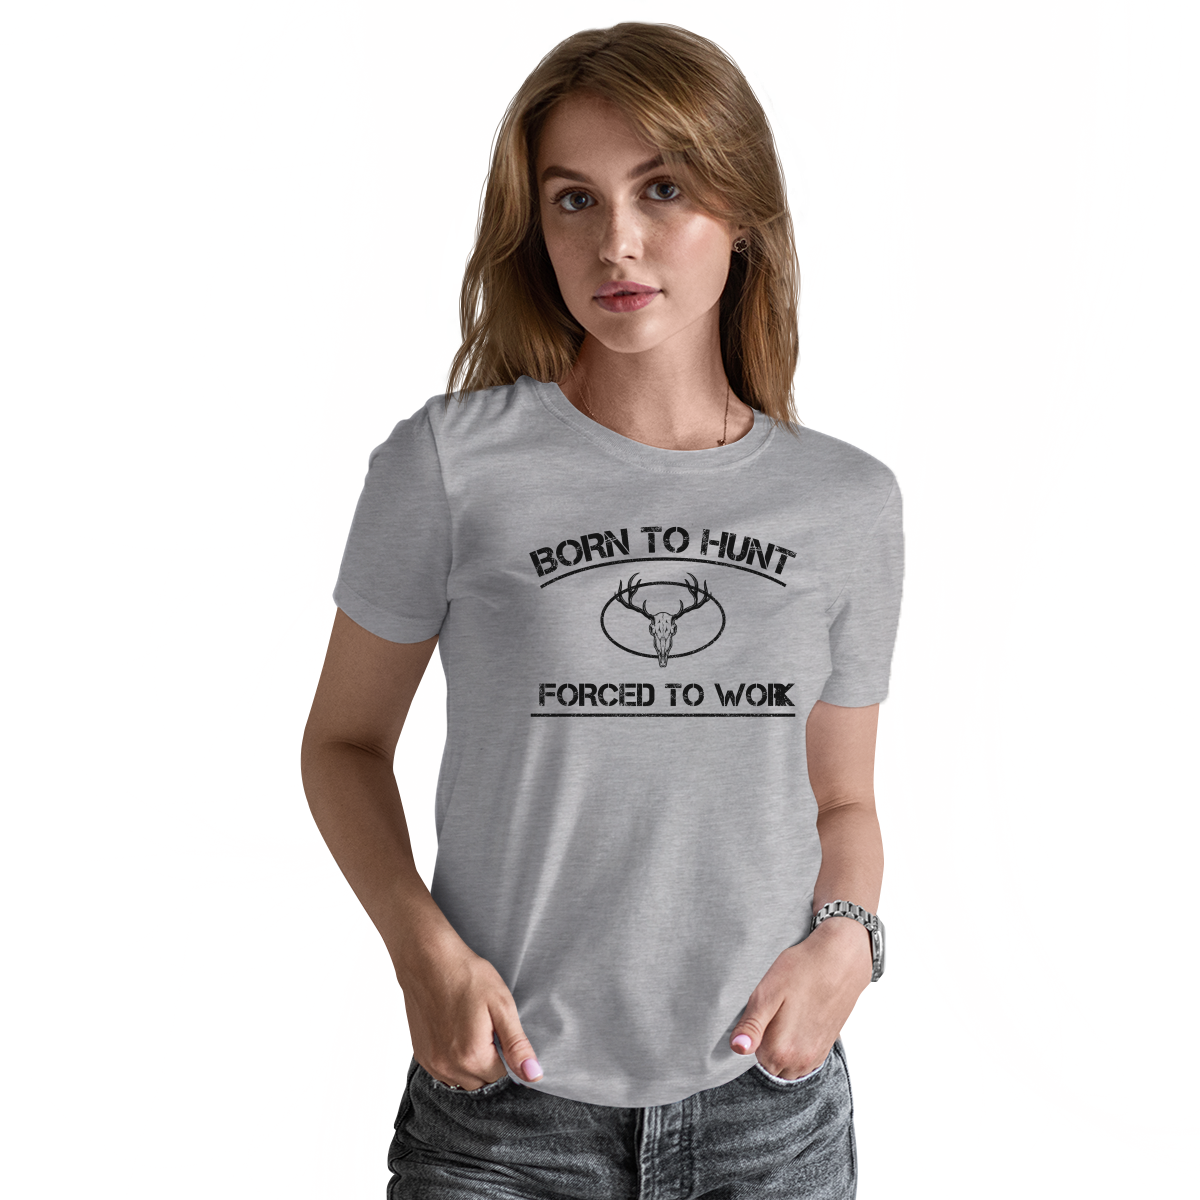 Born To Hunt Forced To Work Women's T-shirt | Gray